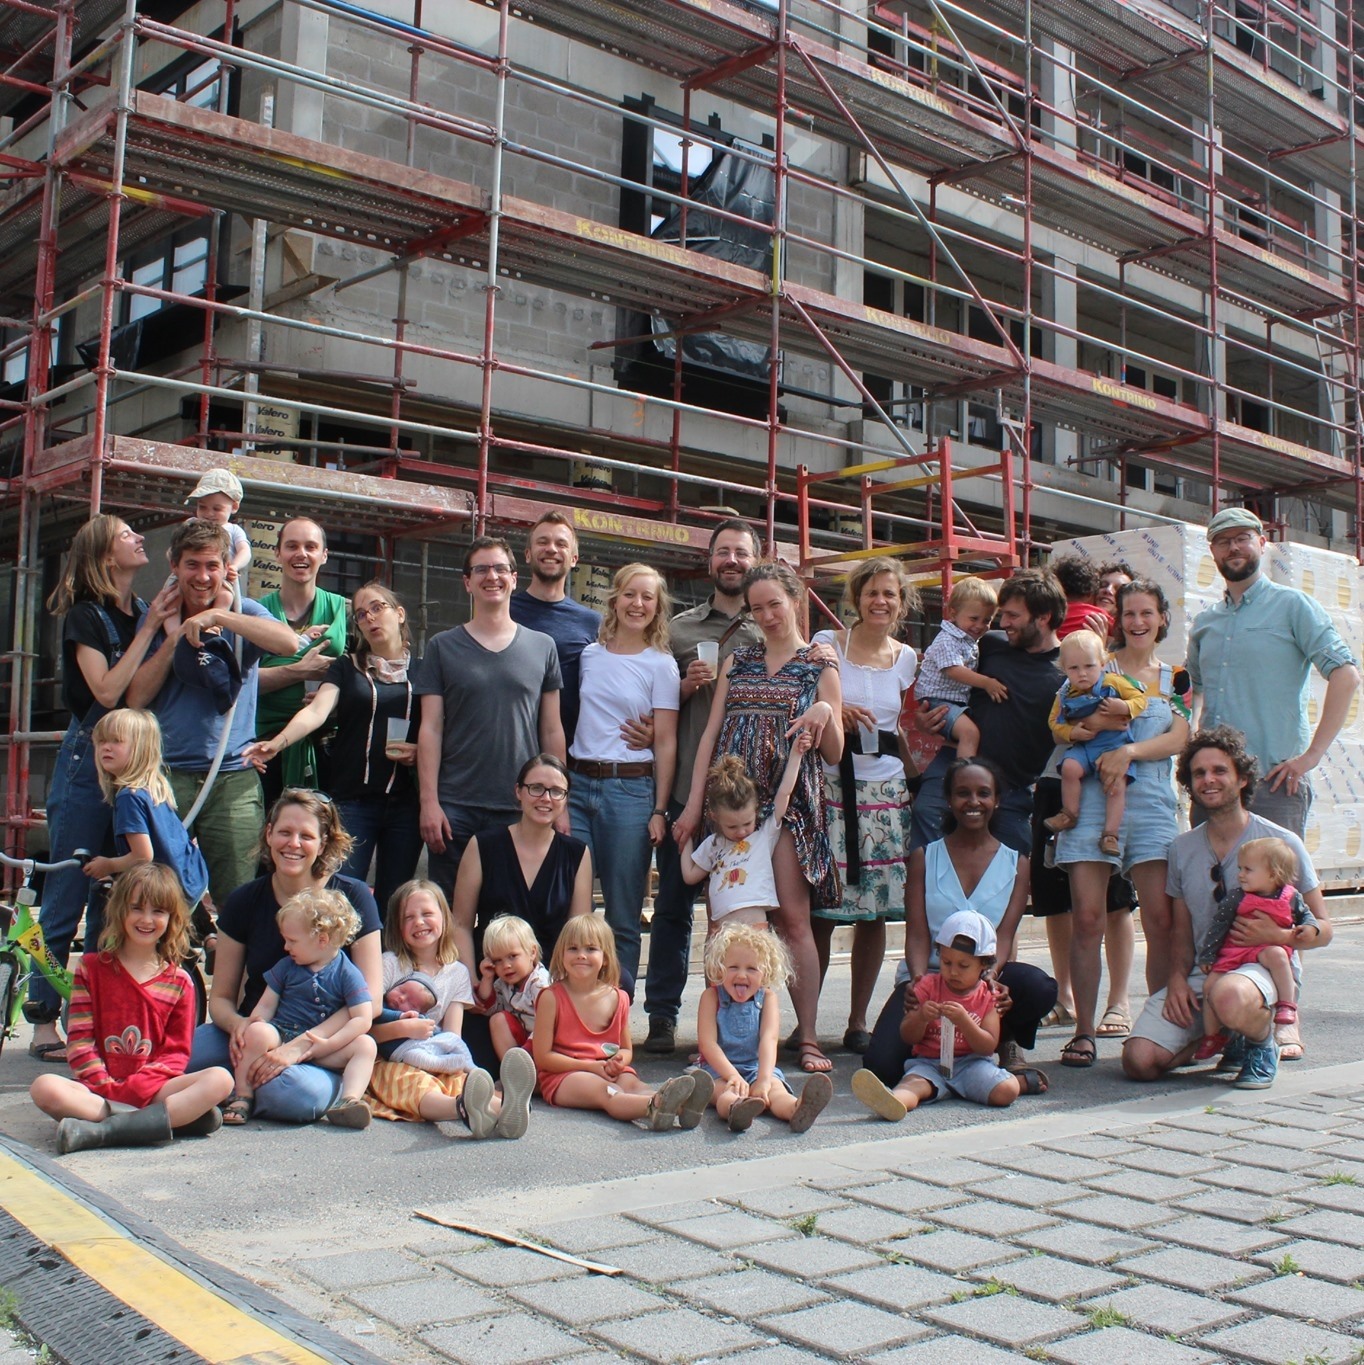 The Habitat Groupé Tivoli Foundation is a residential community founded by 9 families who want to live differently in Brussels. They were thinking about the project for years and finally their dream came true in March 2021.